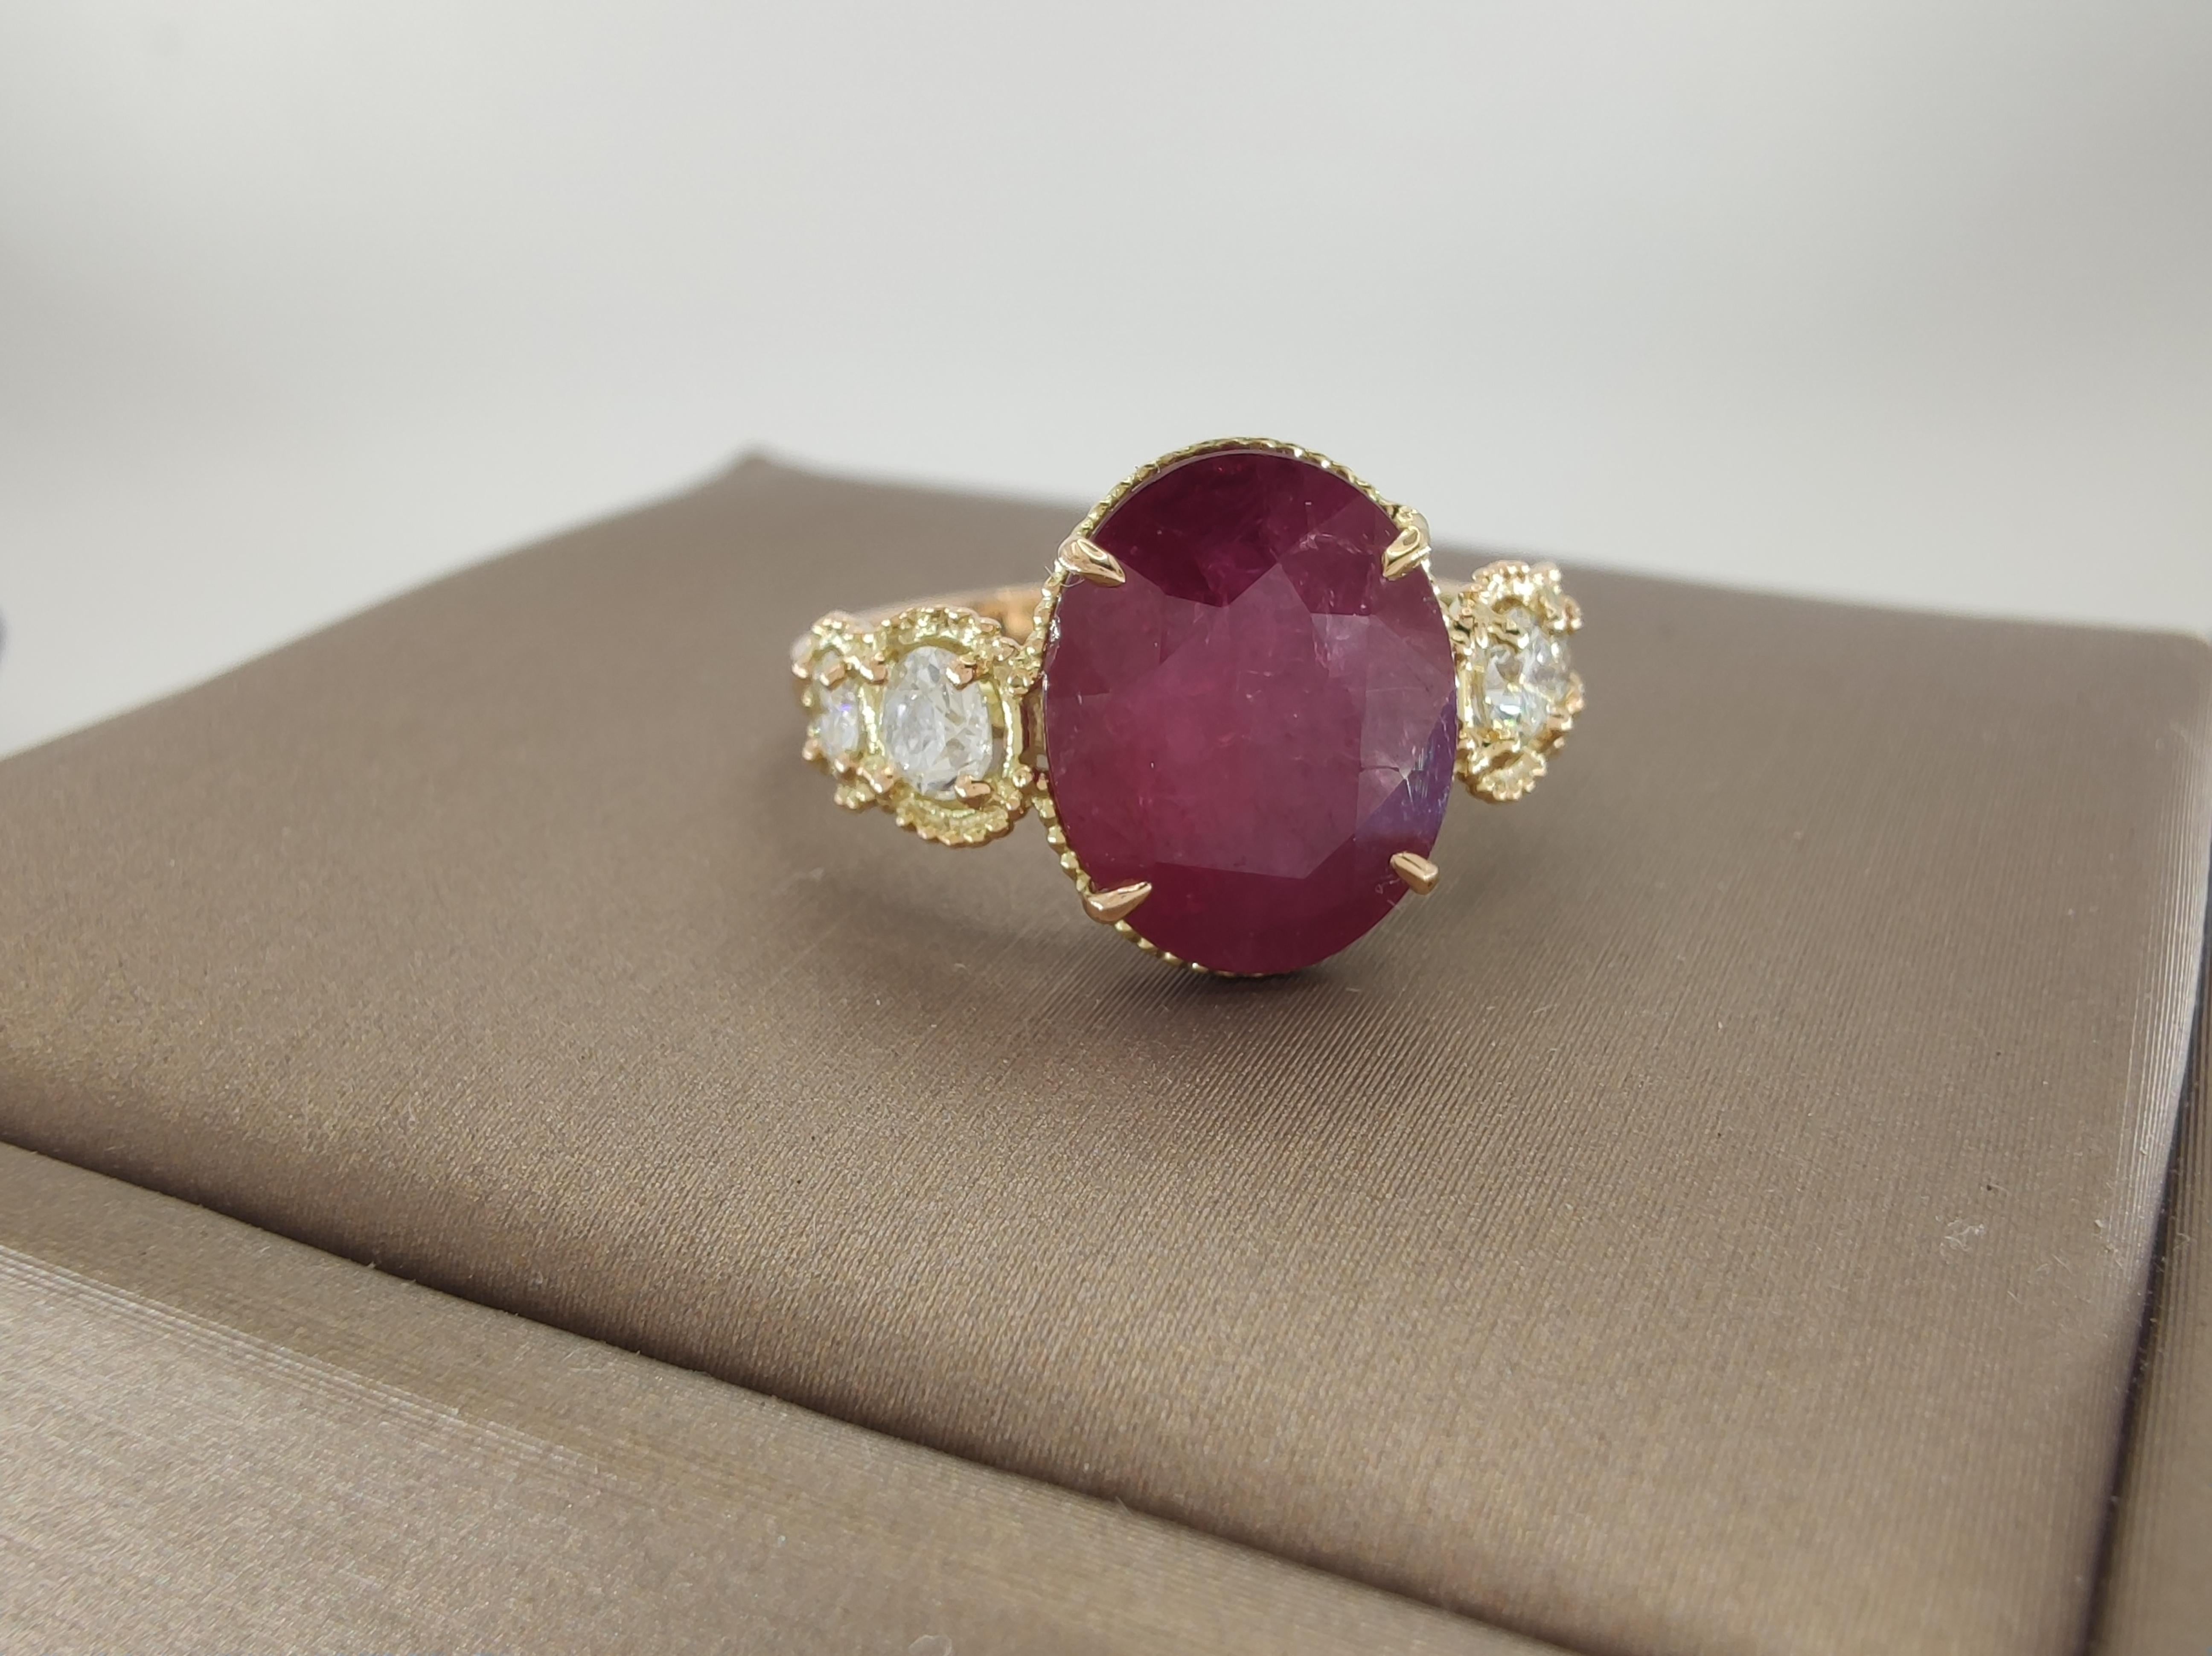 Oval Cut Certified 4.17 carats Ruby Diamond 14K Gold Ring - Contemporary Handmade For Sale